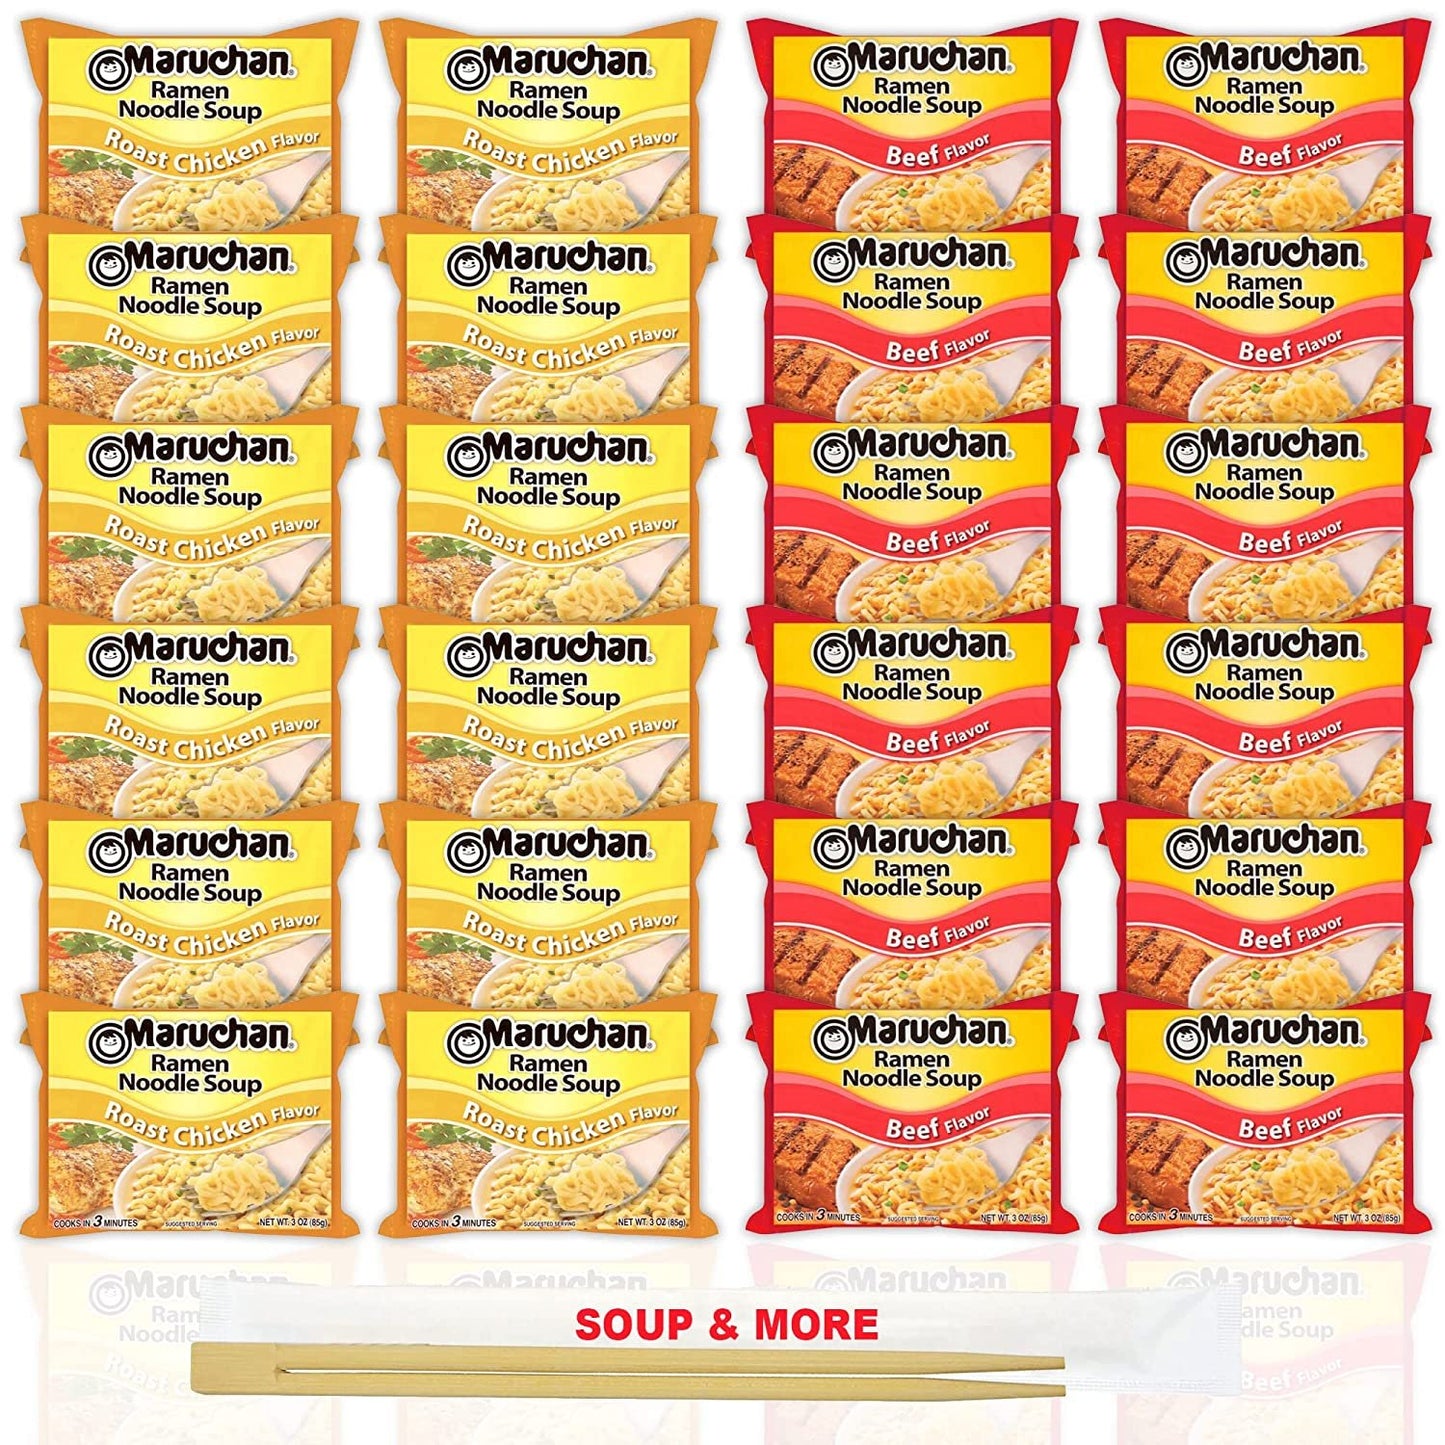 Maruchan Ramen Instant Noodle Soup Variety, 2 Flavors - 12 Packs Roast Chicken & 12 Packs Beef , 3 Ounce Single Servings Lunch / Dinner Variety